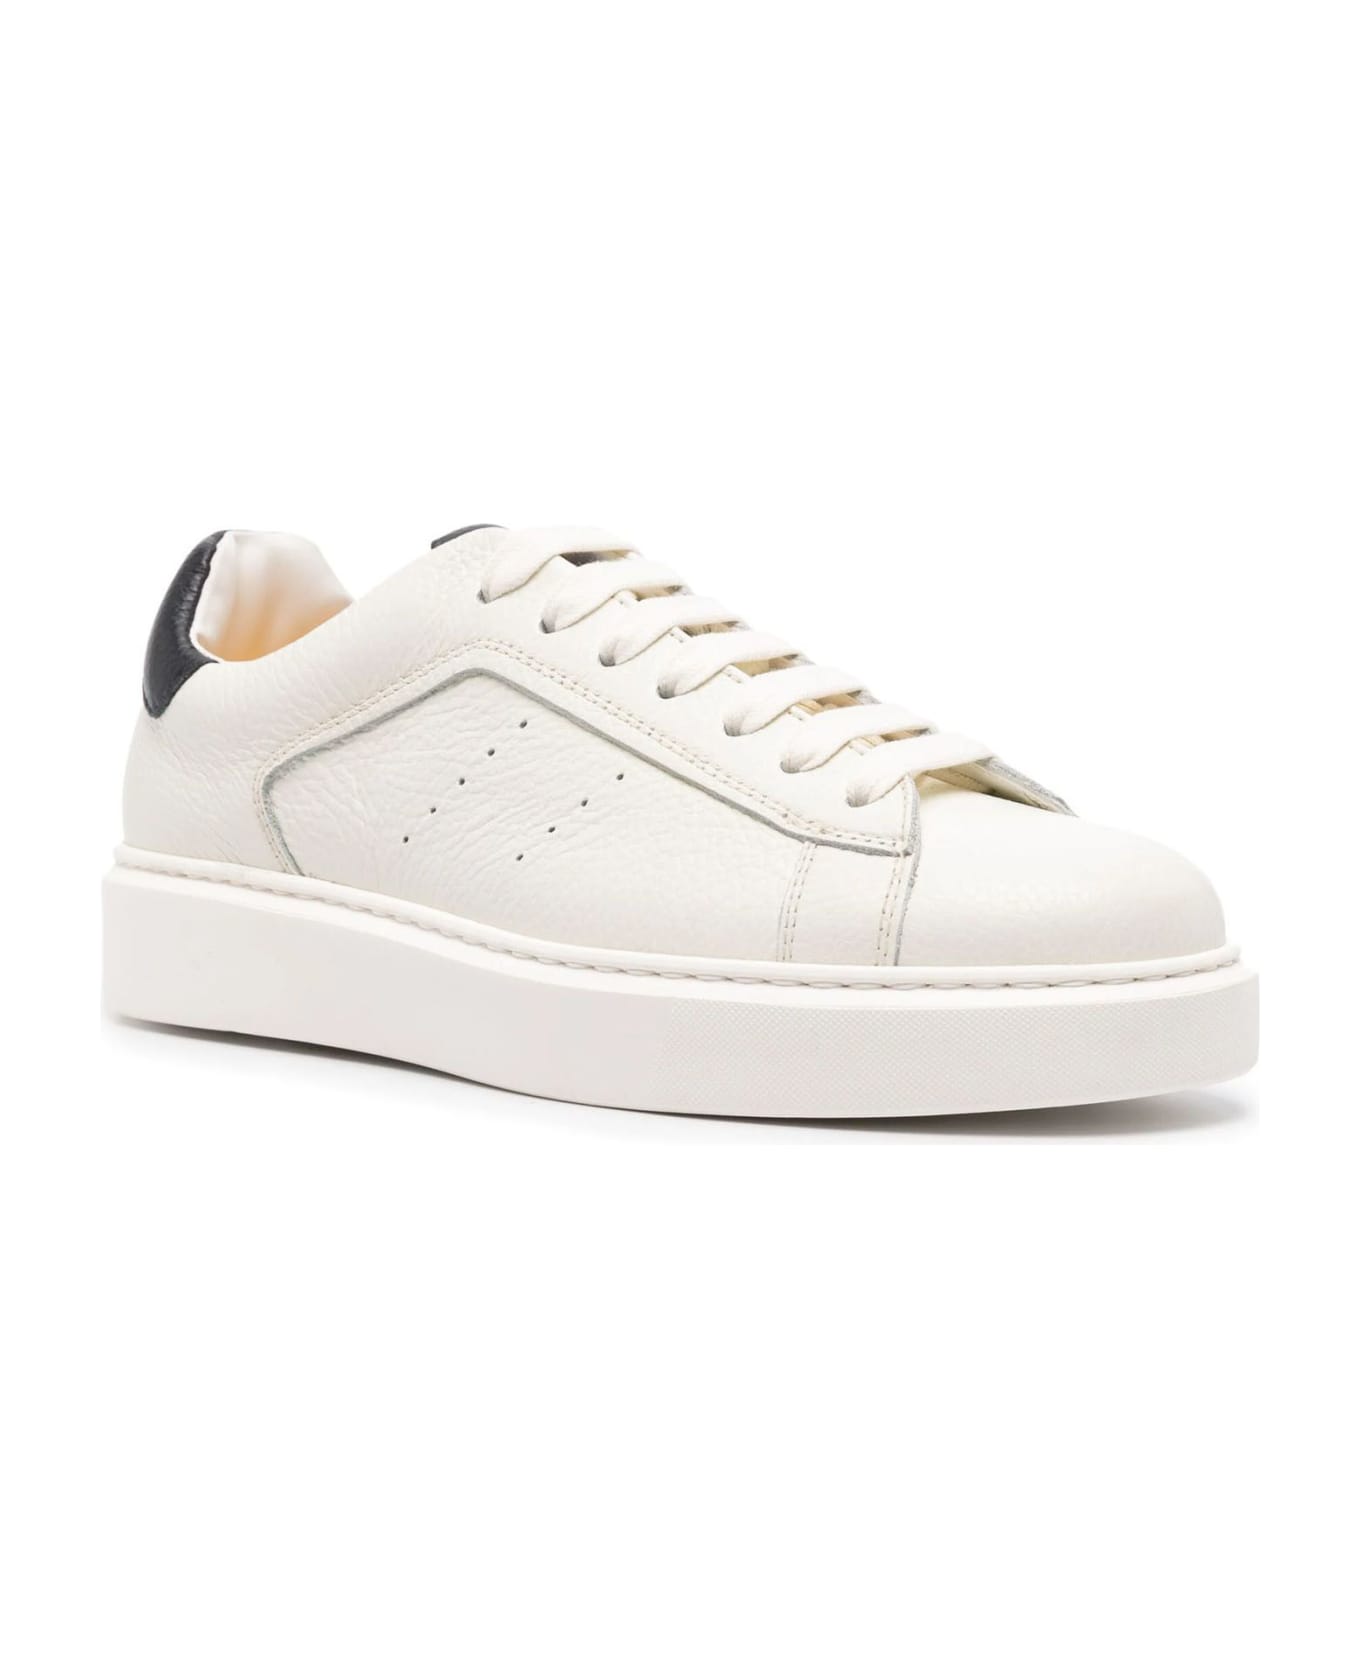 Doucal's White Calf Leather Sneakers - Panna